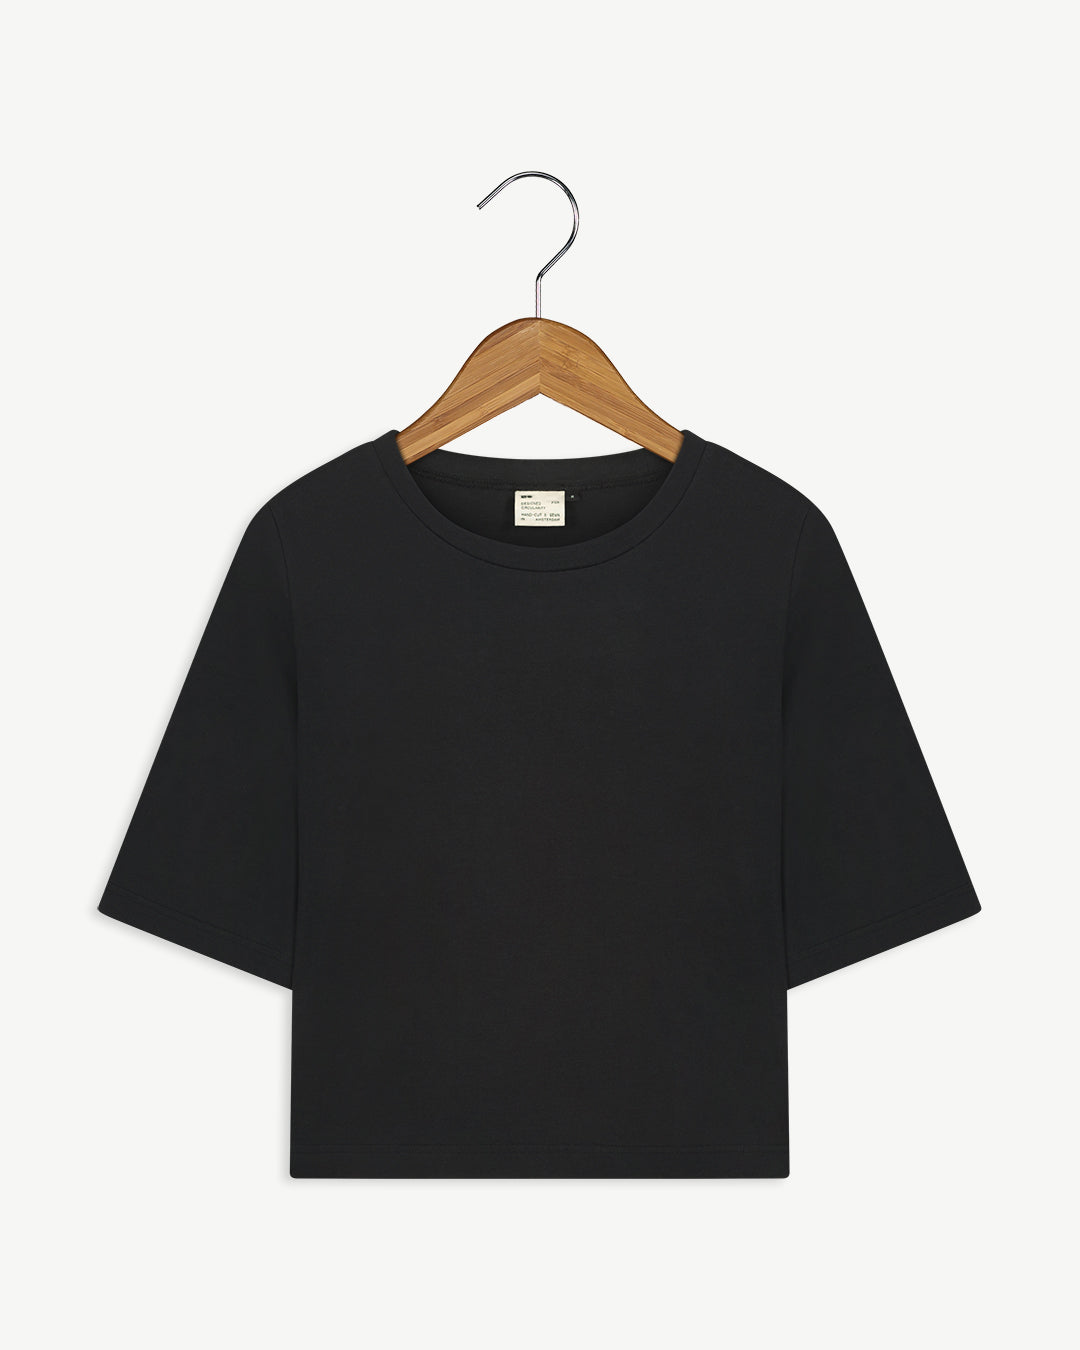 New Optimist womenswear Rondine | T-shirt with elbow-length sleeves T-shirt BLACK